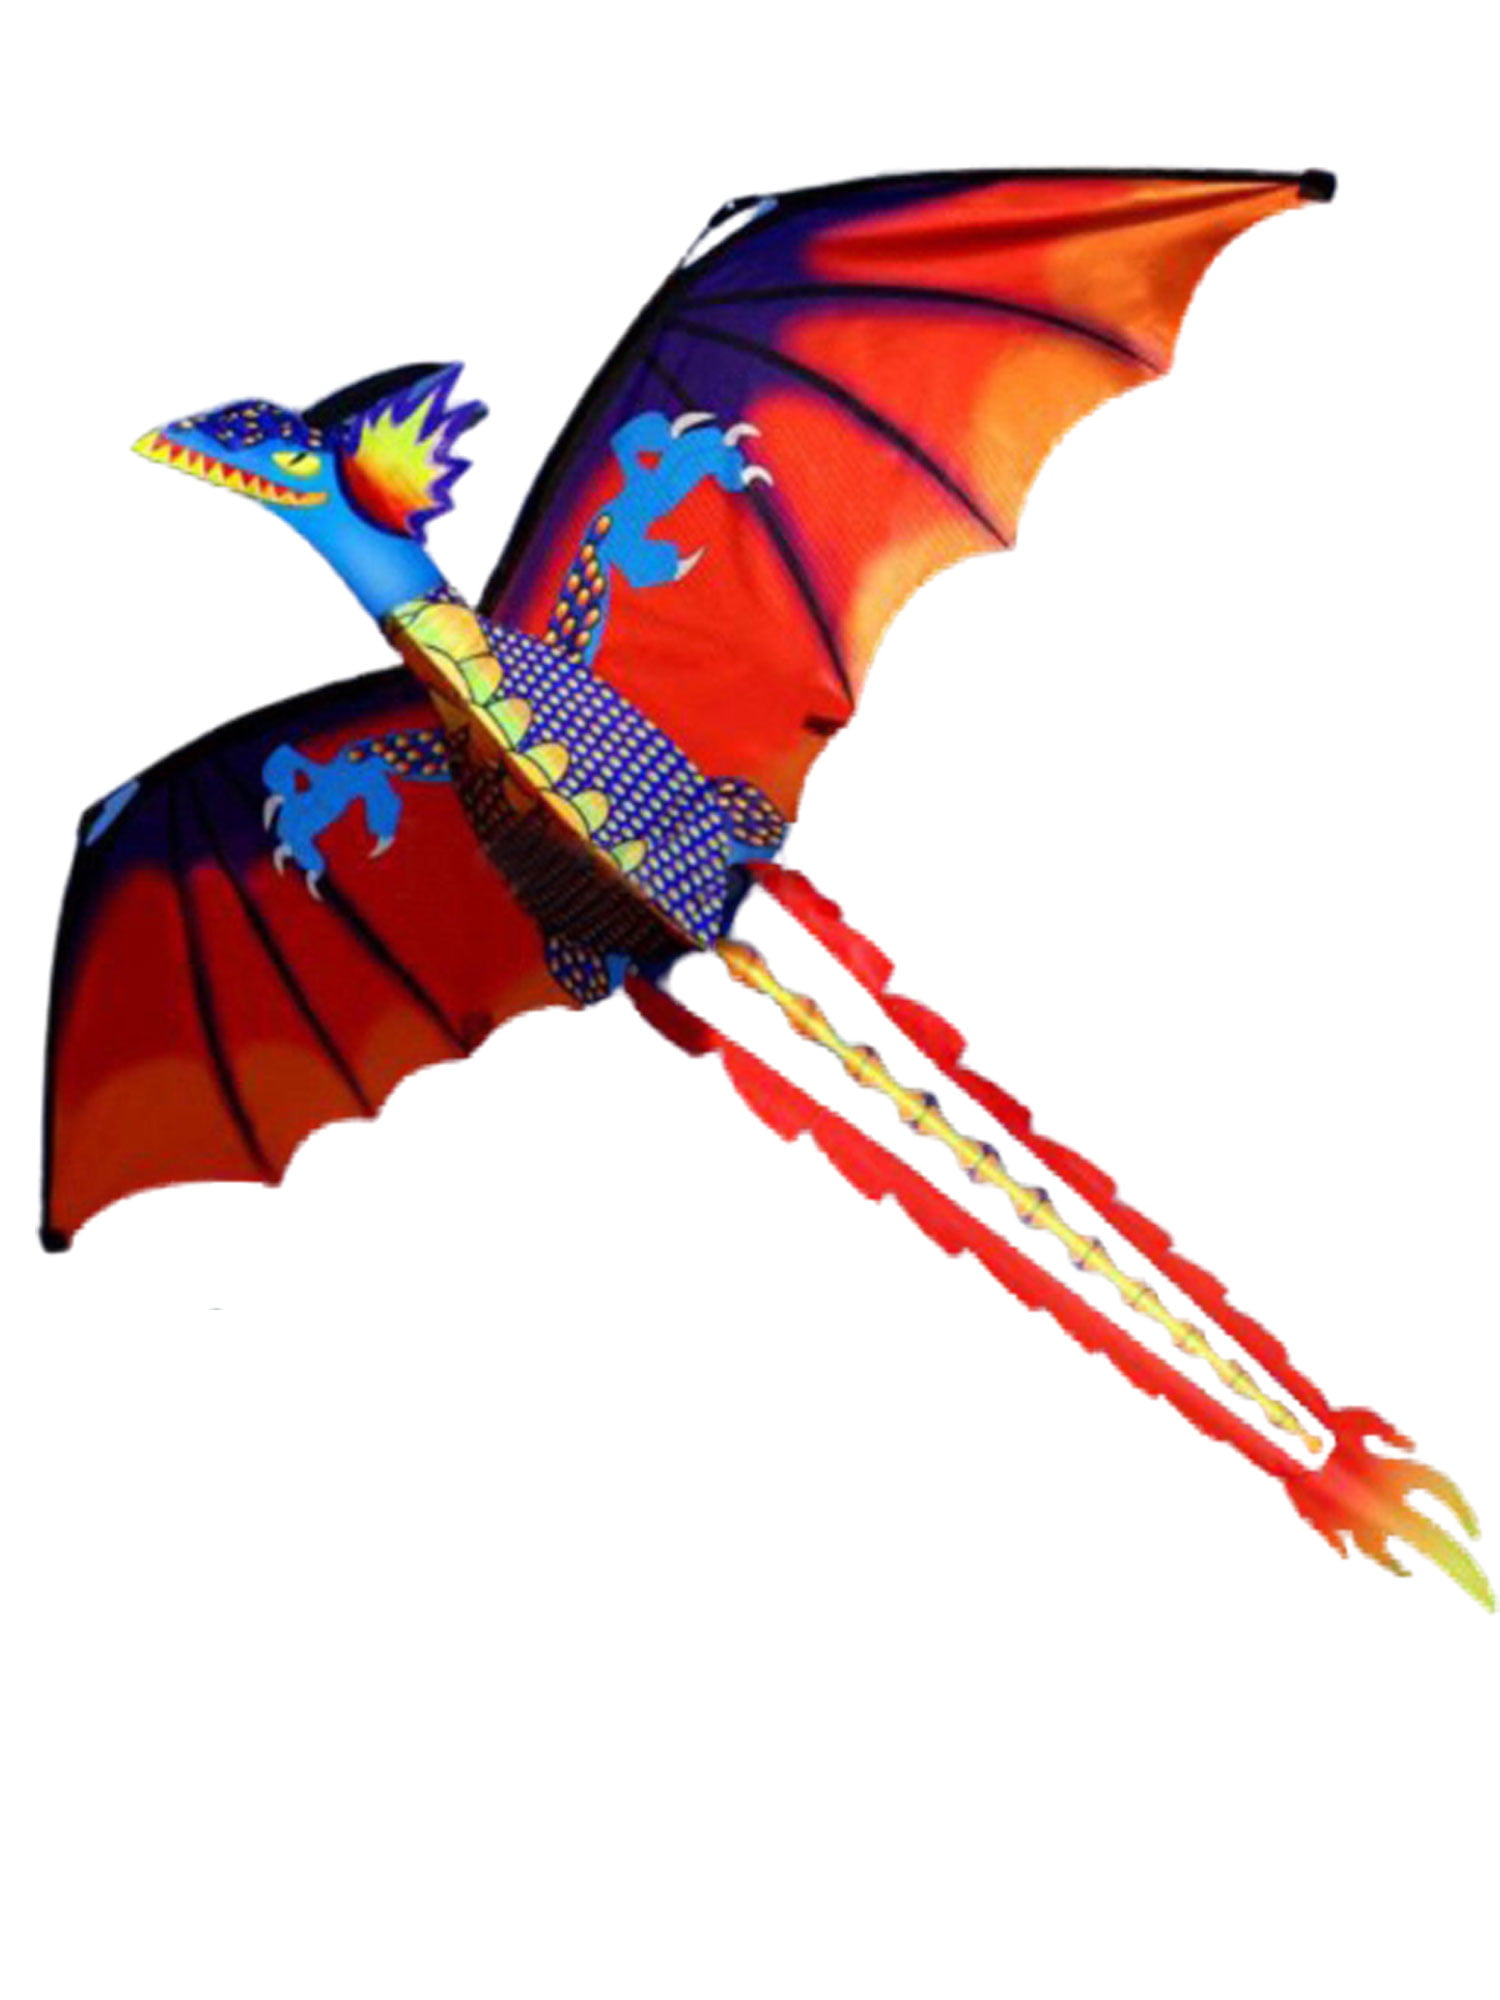 LED Lights Dragon Kite outdoor Easy to Fly Single Line With Tail and flying tool 